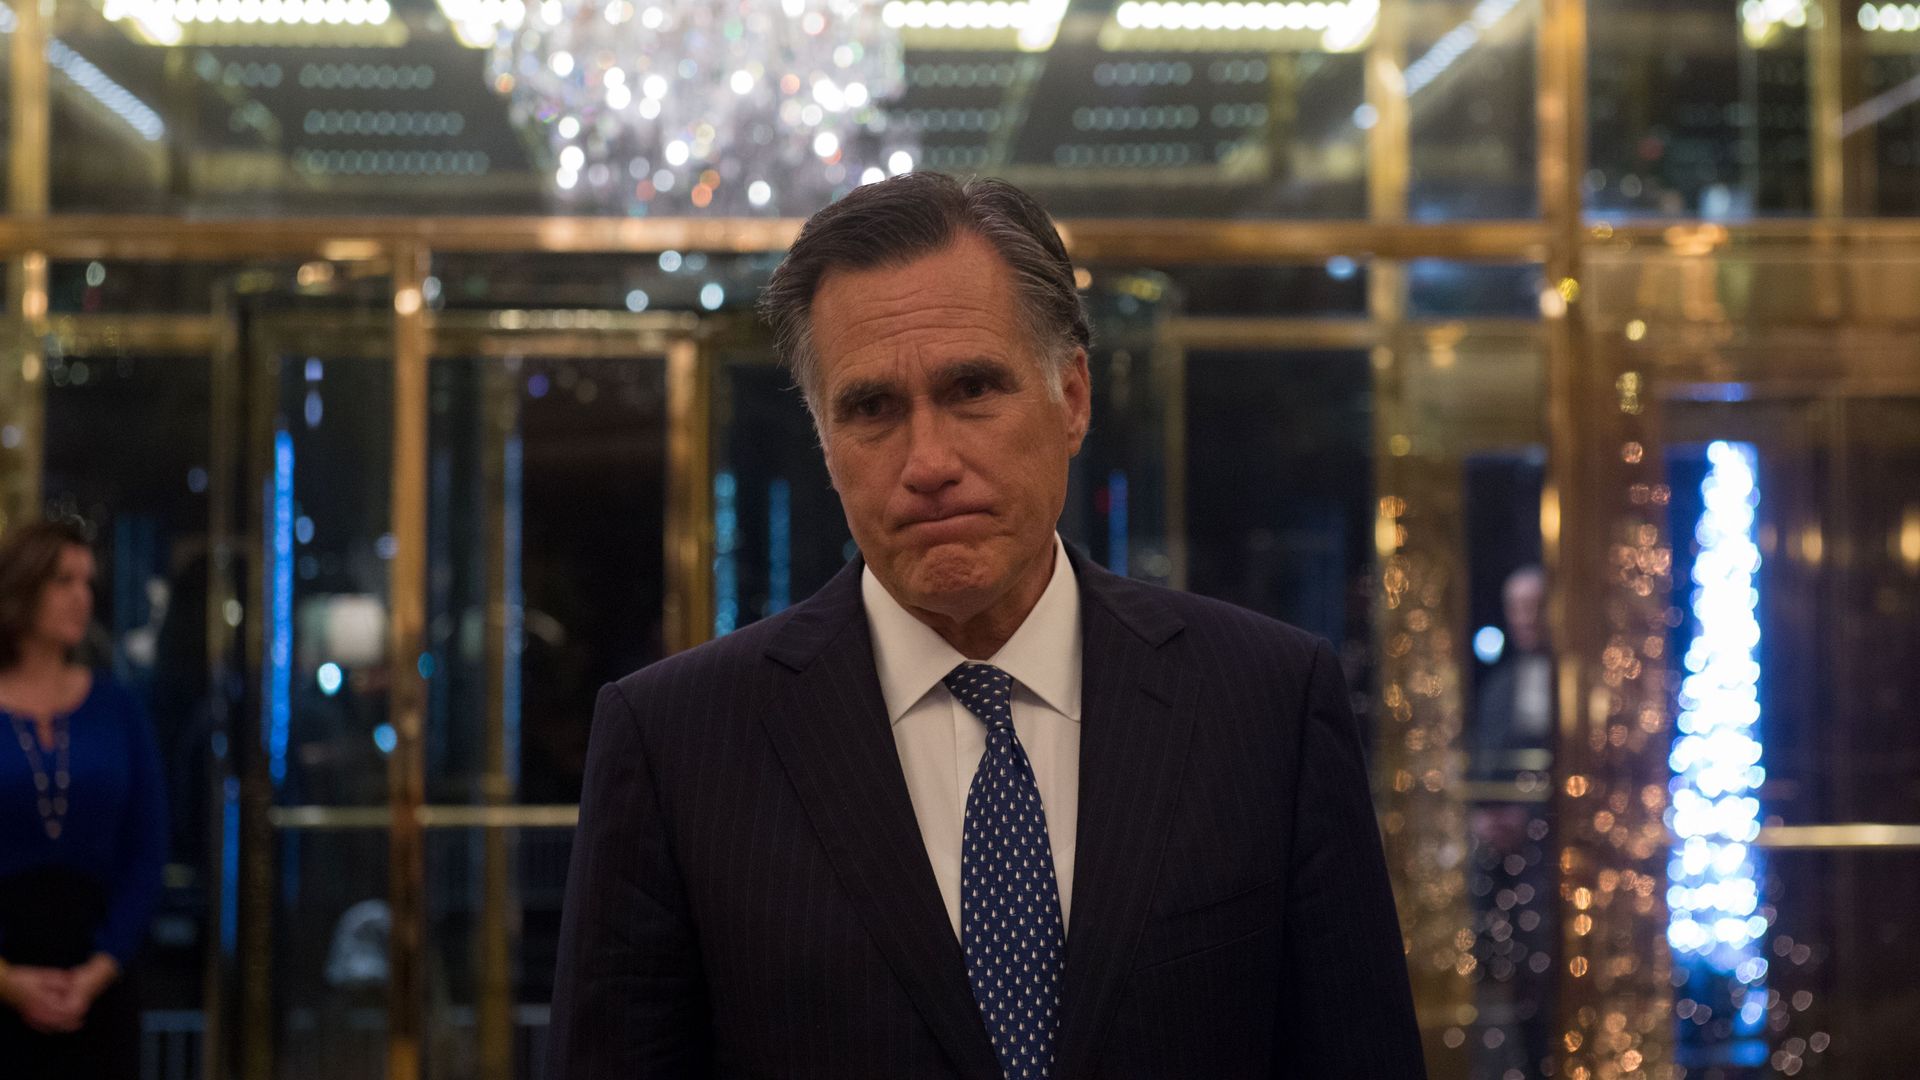 Former Republican presidential nominee Mitt Romney. Photo: Bryan R. Smith/AFP/Getty Images